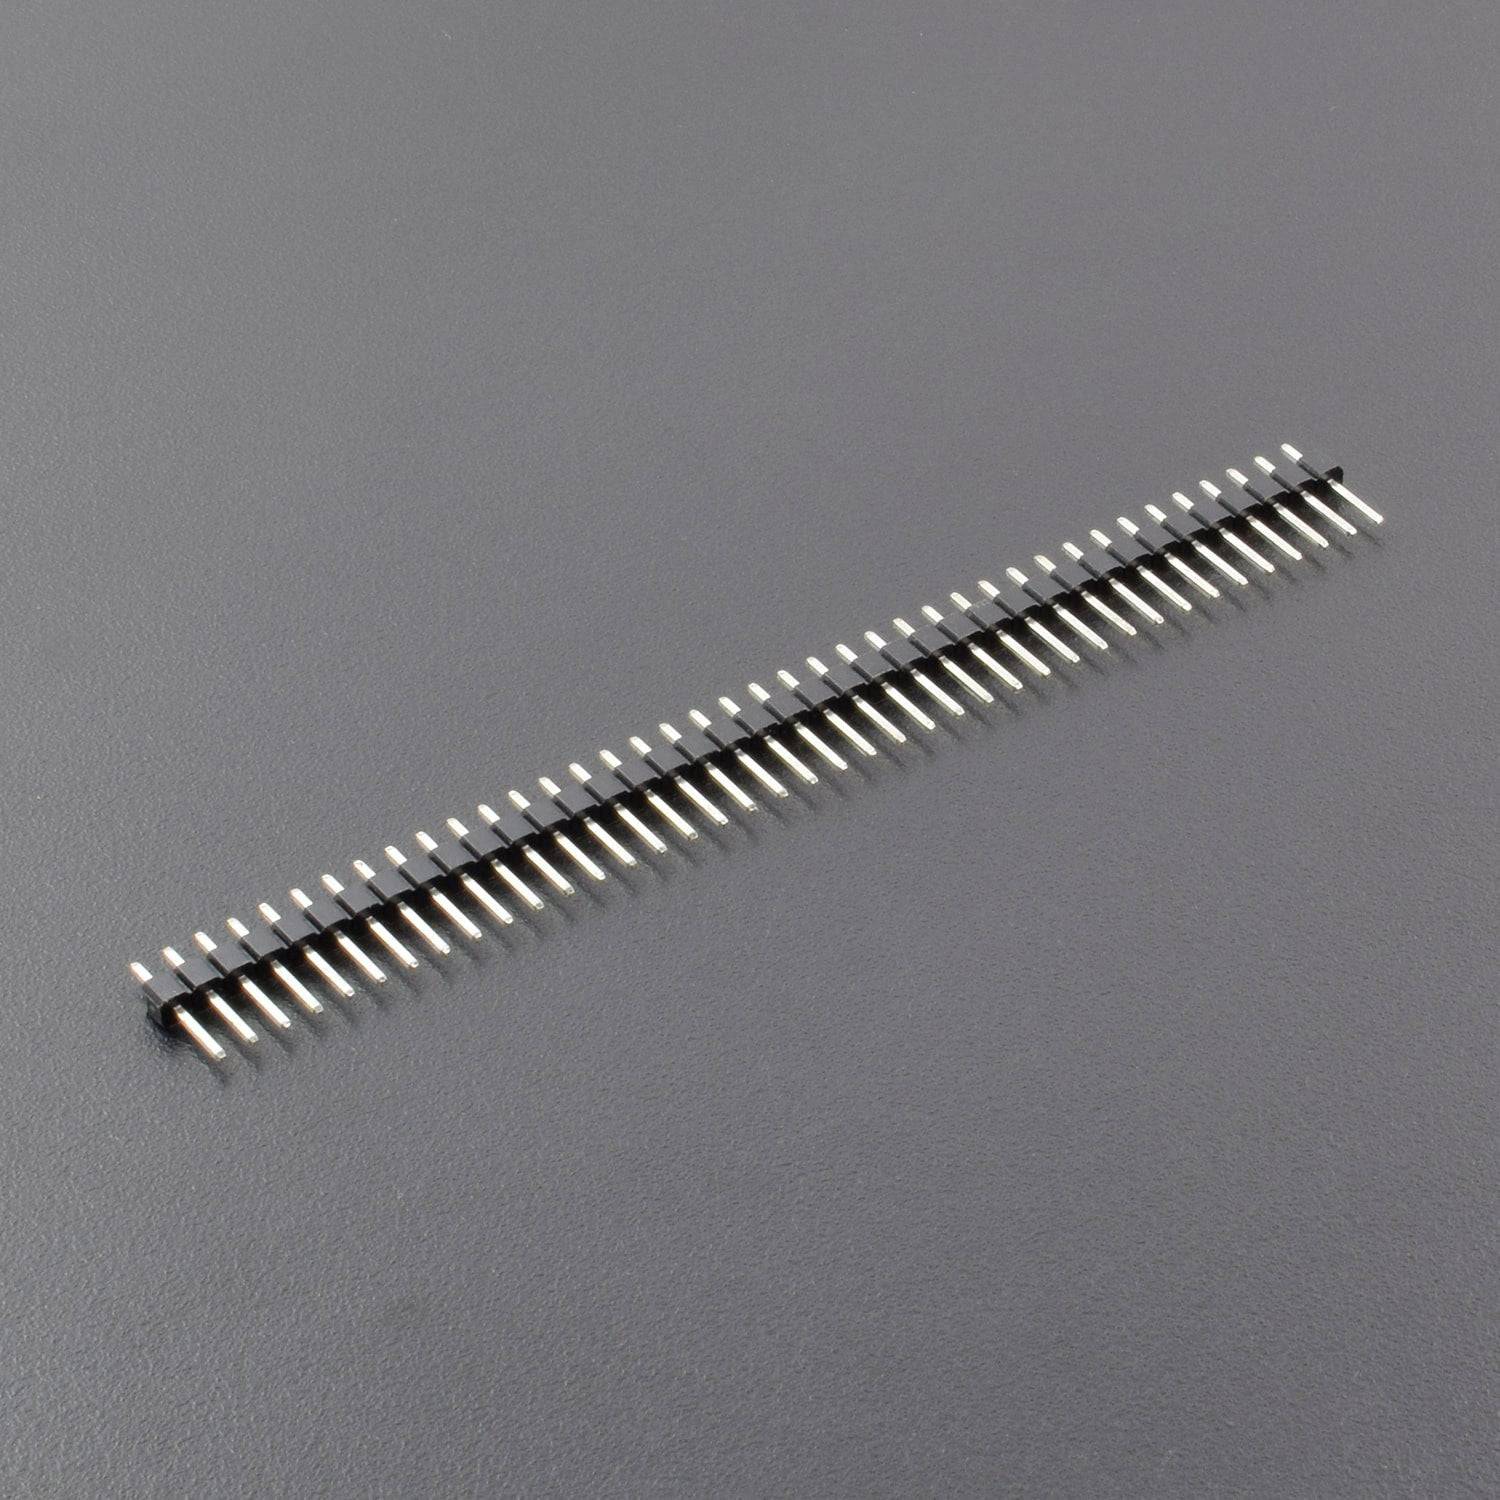 40 Pin 0.1 Inch (2.54mm) Straight Single Row Male Pin Header Connector-  RK004 - REES52